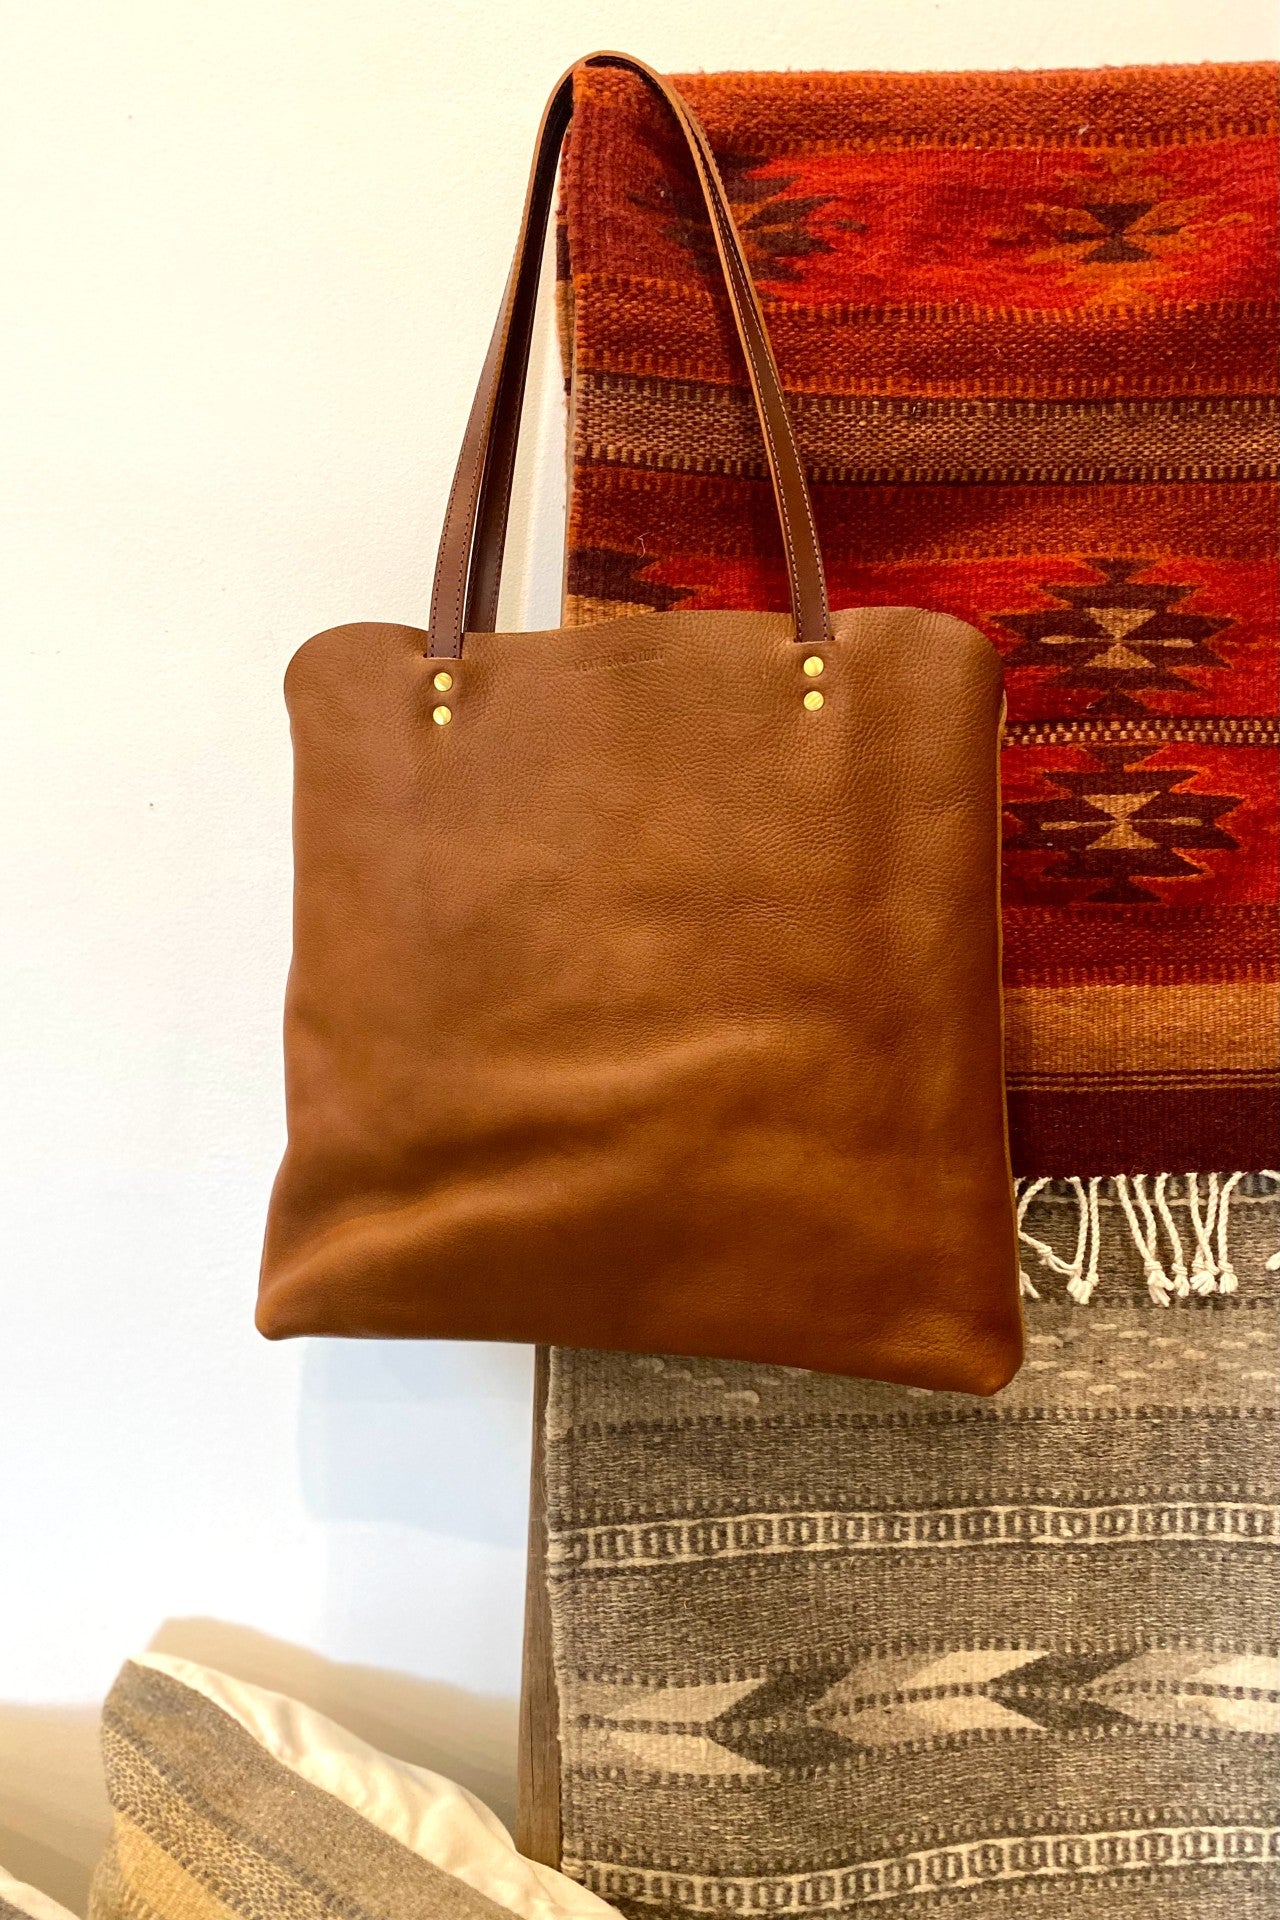 WEATHER & STORY - Large Everyday Leather Tote Shoulde Bag - Brown Pebbled Leather - Handmade in Austin, Texas, USA